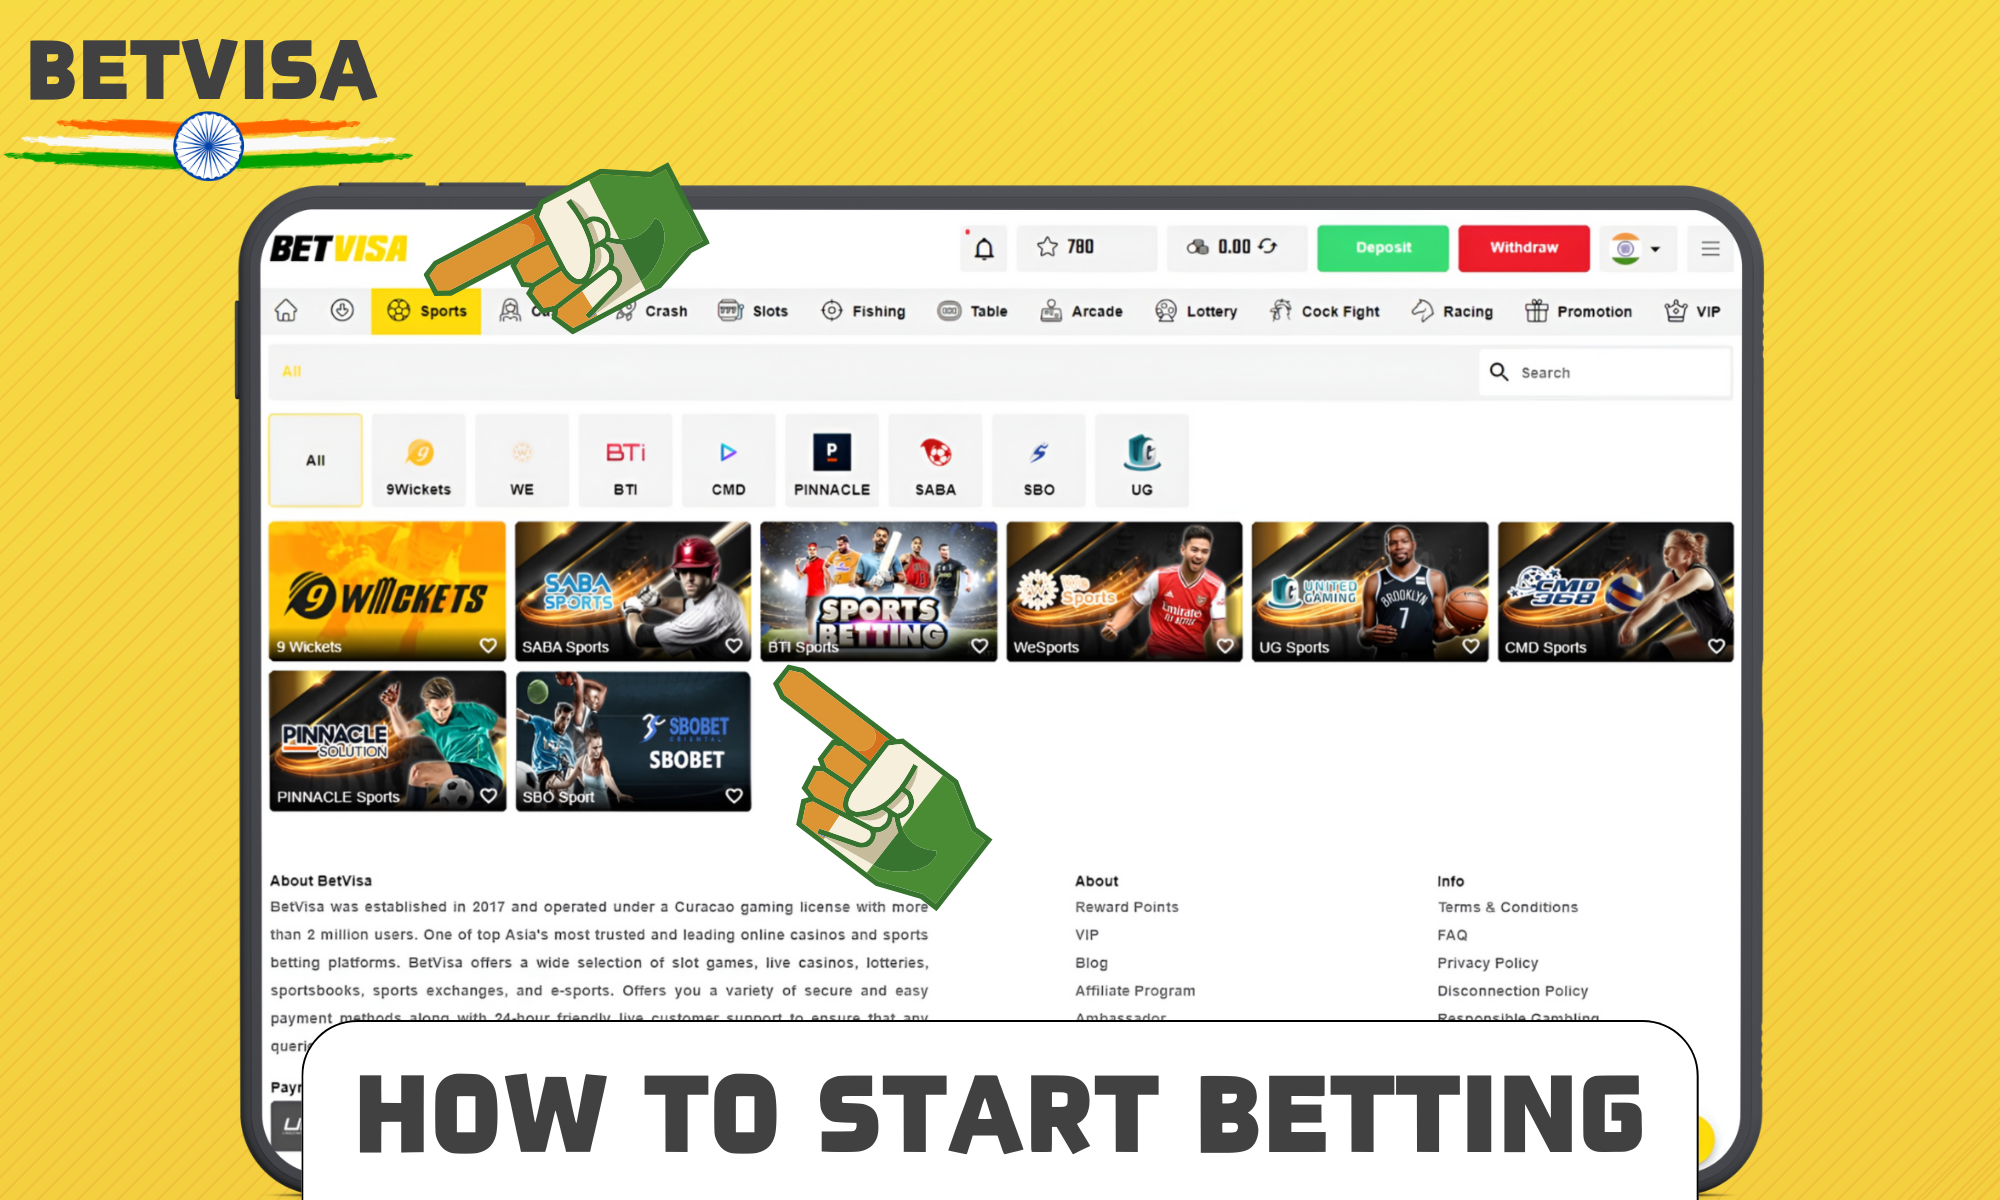 Instructions on how to bet on sports events at Betvisa